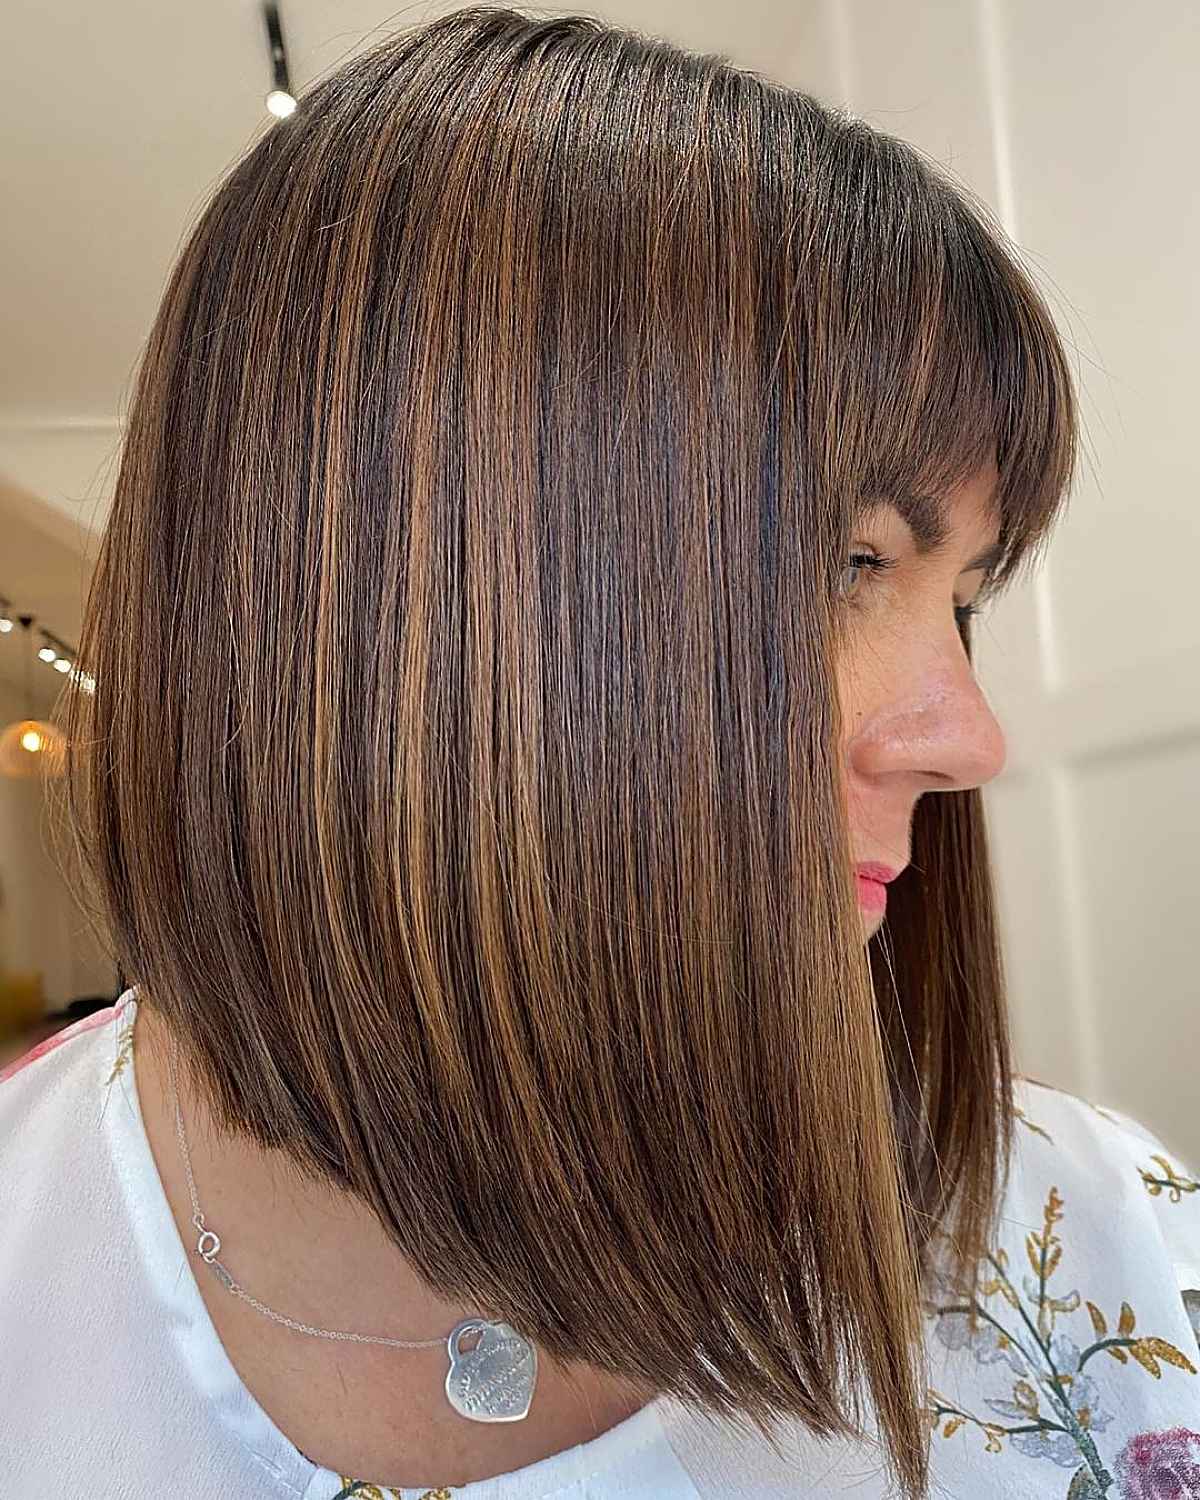 Brunette A-line Lob Cut with Arched Bangs